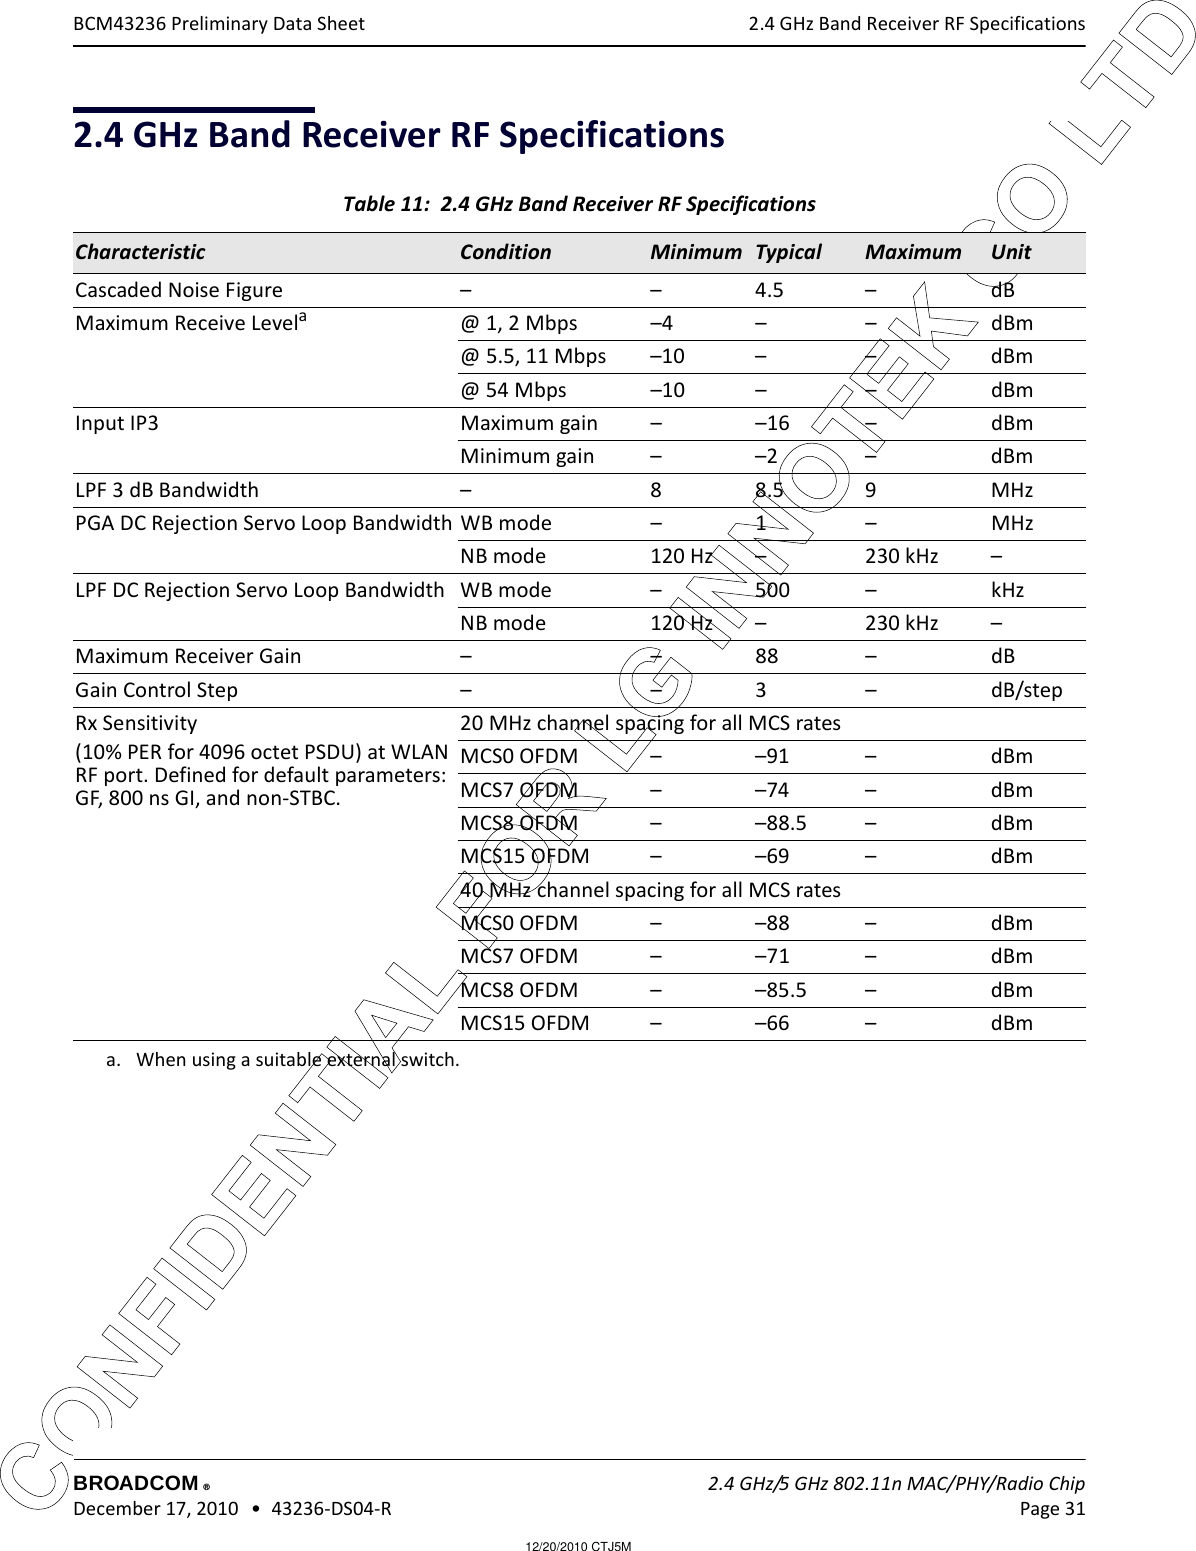 12/20/2010 CTJ5MCONFIDENTIAL FOR LG INNOTEK CO LTD 2.4 GHz Band Receiver RF SpecificationsBROADCOM    2.4 GHz/5 GHz 802.11n MAC/PHY/Radio Chip December 17, 2010   •  43236-DS04-R Page 31®BCM43236 Preliminary Data Sheet2.4 GHz Band Receiver RF SpecificationsTable 11:  2.4 GHz Band Receiver RF Specifications  Characteristic Condition Minimum Typical  Maximum UnitCascaded Noise Figure – – 4.5 – dBMaximum Receive Levelaa. When using a suitable external switch.@ 1, 2 Mbps –4 – – dBm@ 5.5, 11 Mbps –10 – – dBm@ 54 Mbps –10 – – dBmInput IP3 Maximum gain – –16 – dBmMinimum gain – –2 – dBmLPF 3 dB Bandwidth – 8 8.5 9 MHzPGA DC Rejection Servo Loop Bandwidth WB mode – 1 – MHzNB mode 120 Hz – 230 kHz  –LPF DC Rejection Servo Loop Bandwidth WB mode – 500 – kHzNB mode 120 Hz – 230 kHz  –Maximum Receiver Gain – – 88 – dBGain Control Step – – 3 – dB/stepRx Sensitivity(10% PER for 4096 octet PSDU) at WLAN RF port. Defined for default parameters: GF, 800 ns GI, and non-STBC.20 MHz channel spacing for all MCS ratesMCS0 OFDM – –91 – dBmMCS7 OFDM – –74 – dBmMCS8 OFDM – –88.5 – dBmMCS15 OFDM – –69 – dBm40 MHz channel spacing for all MCS ratesMCS0 OFDM – –88 – dBmMCS7 OFDM – –71 – dBmMCS8 OFDM – –85.5 – dBmMCS15 OFDM – –66 – dBm